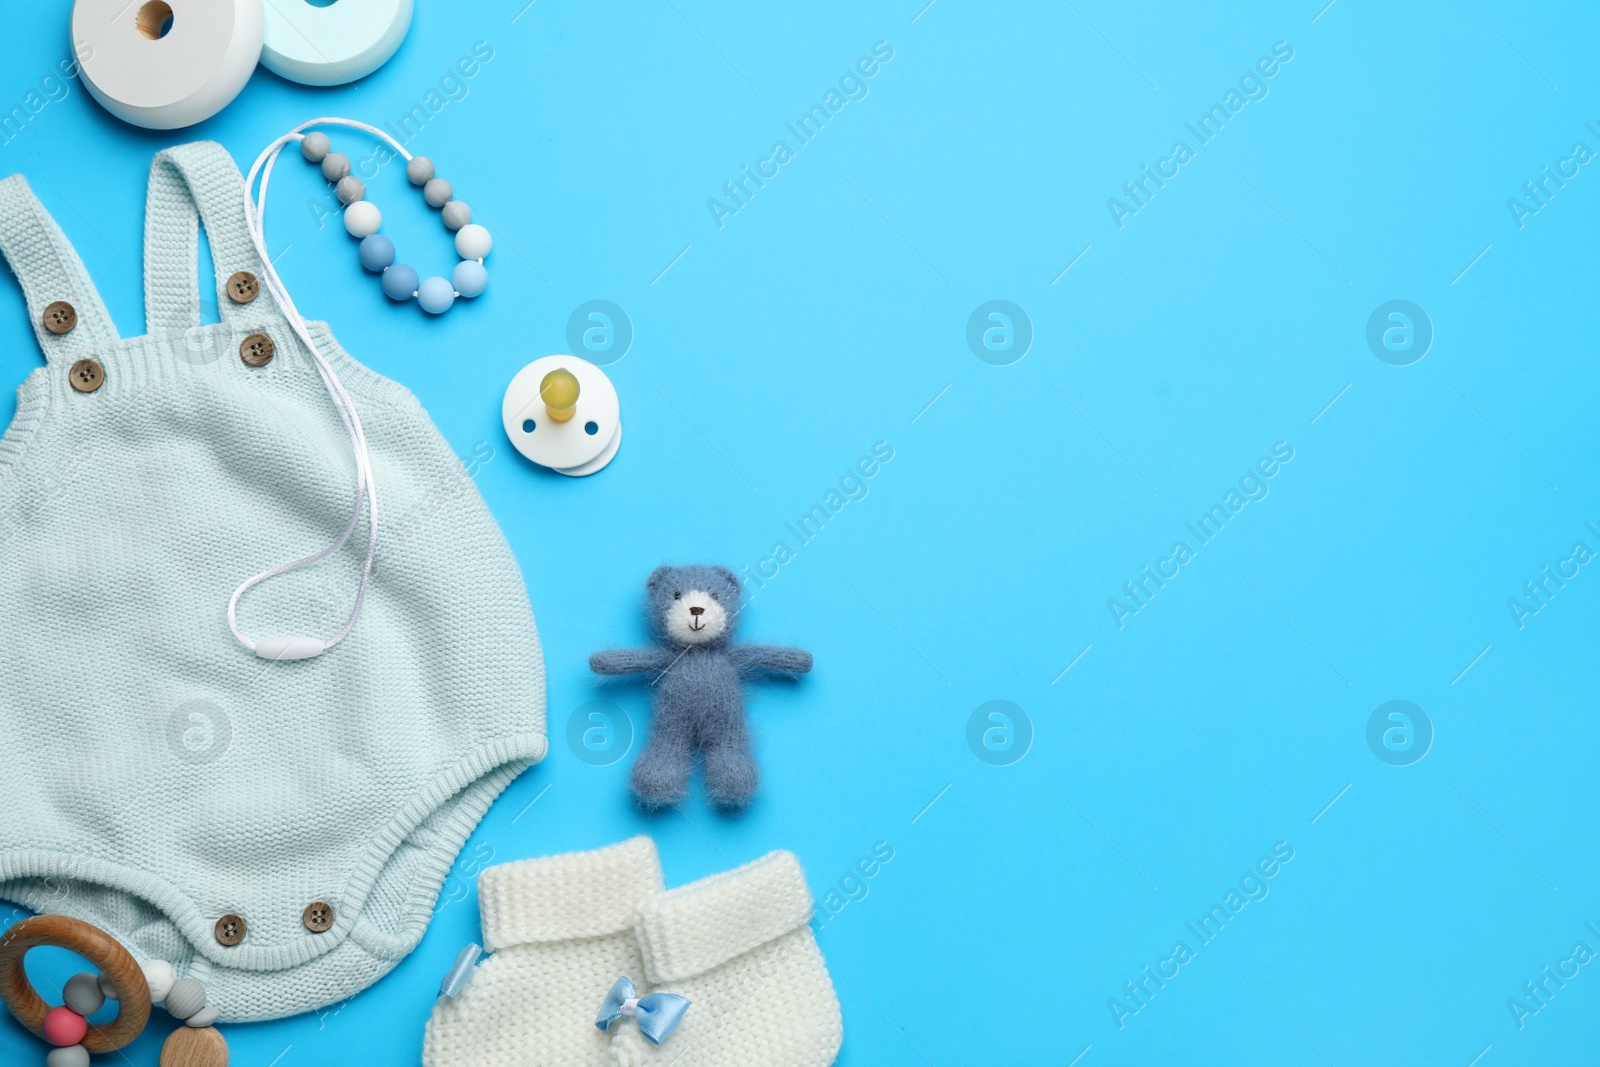 Photo of Flat lay composition with cute baby stuff on light blue background, space for text